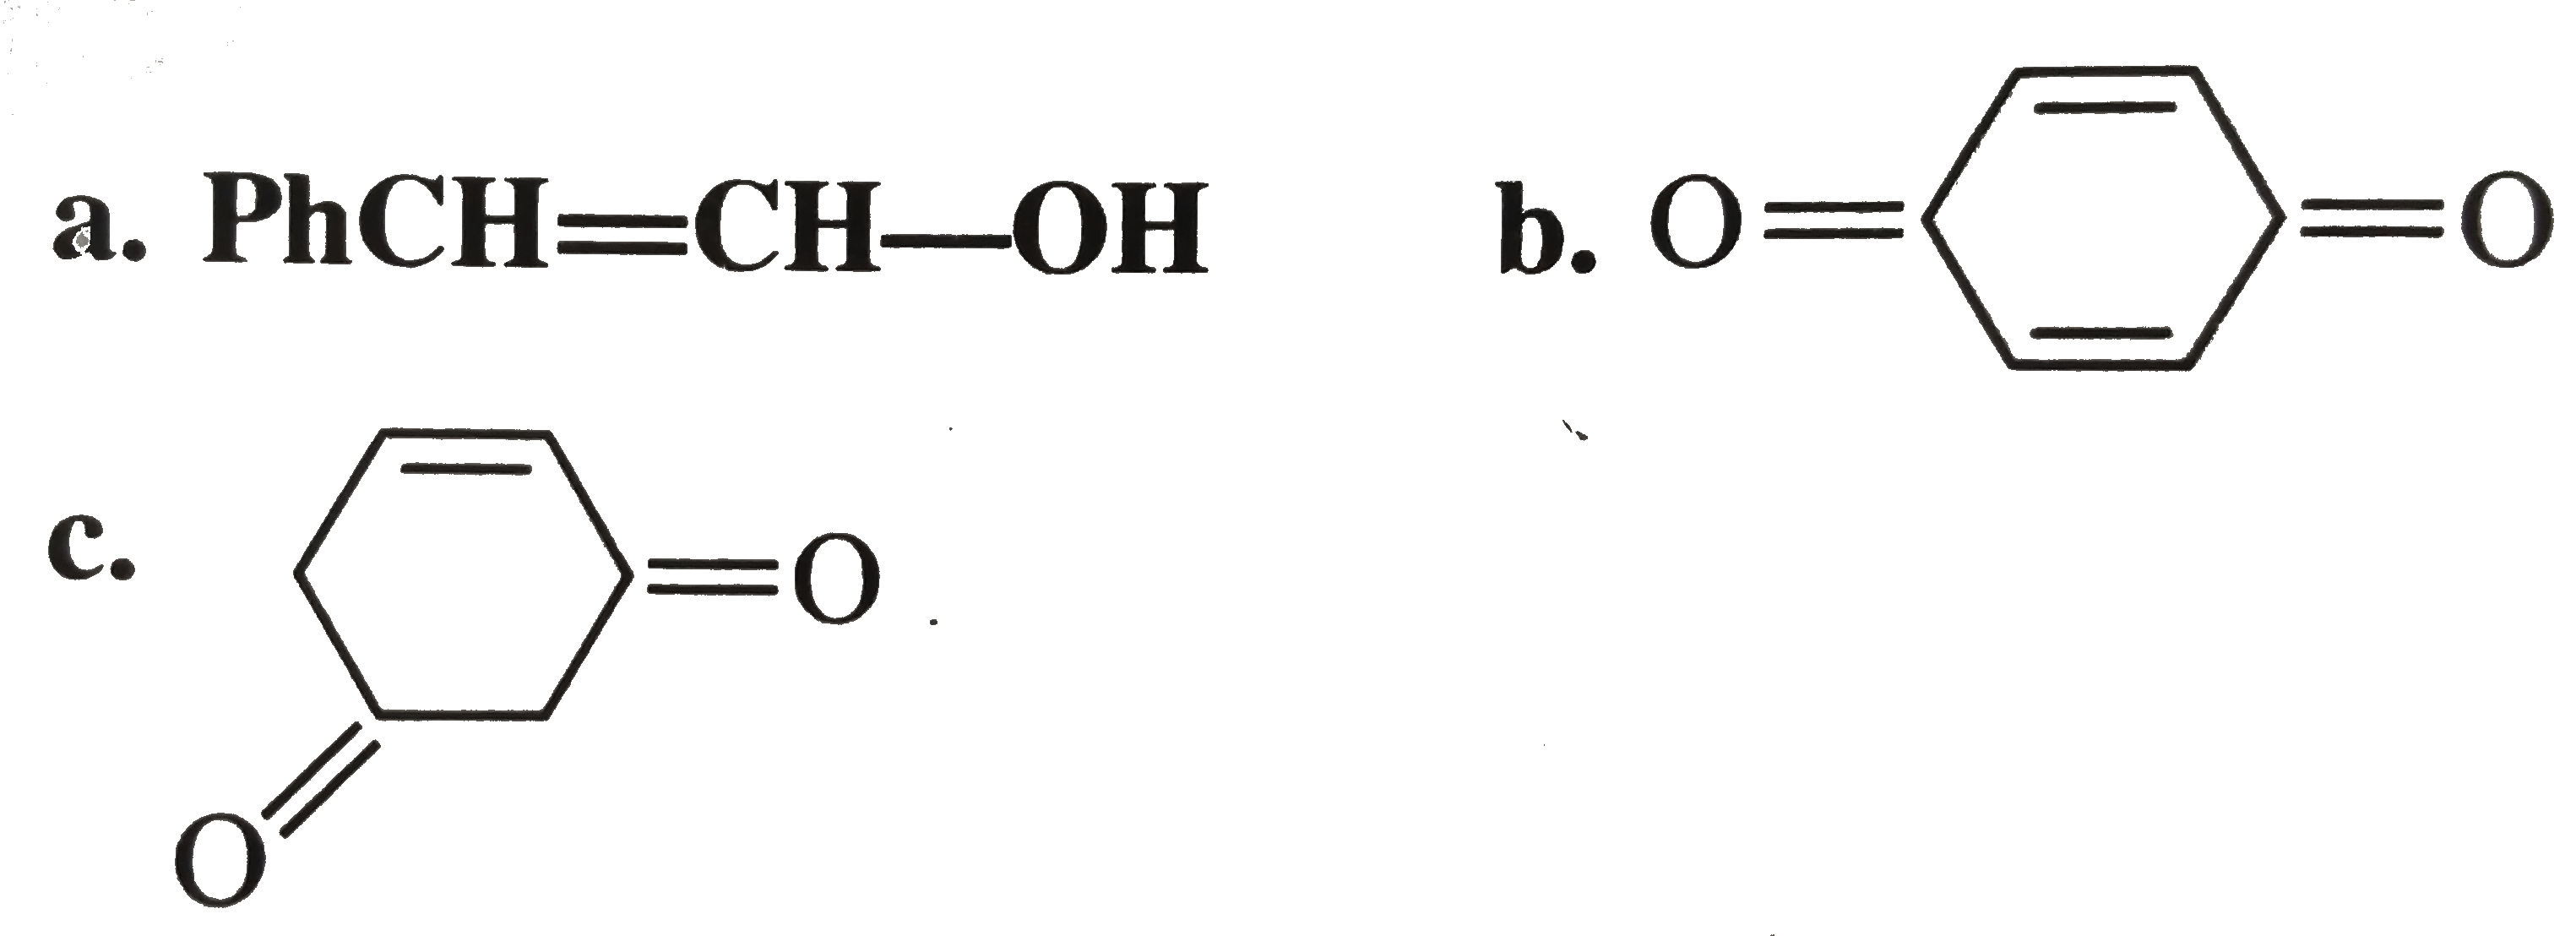 Keto-enol tautomerism is observed in :   (i) a.PhCHO  ,  b.PhCOCH(3)   c. PhCOPh , d. PhCOCH(2)COCH(3)      (II) Arrange the following in the decreasing order of enol content:   (i) a.CH(3)COCH(2)CHO  , b. CH(3)COCH(3)   c. CH(3)CHO  ,  d. CH(3)COCH(2)COCH(3)   (ii) a. CH(2)(COOEt)(2) (Diethyl malonate)   b. CH(3)COCH(2)COOEt(EA A)   c. CH(3)COCH(2)COCH(3)   d. PhCOCH(2)COCH(3)      (III) Give the decreasing order of enol content of ethyl acetoacetate in the following solvents:   a. Water b. Methanol   c. Benzene d. Acetone